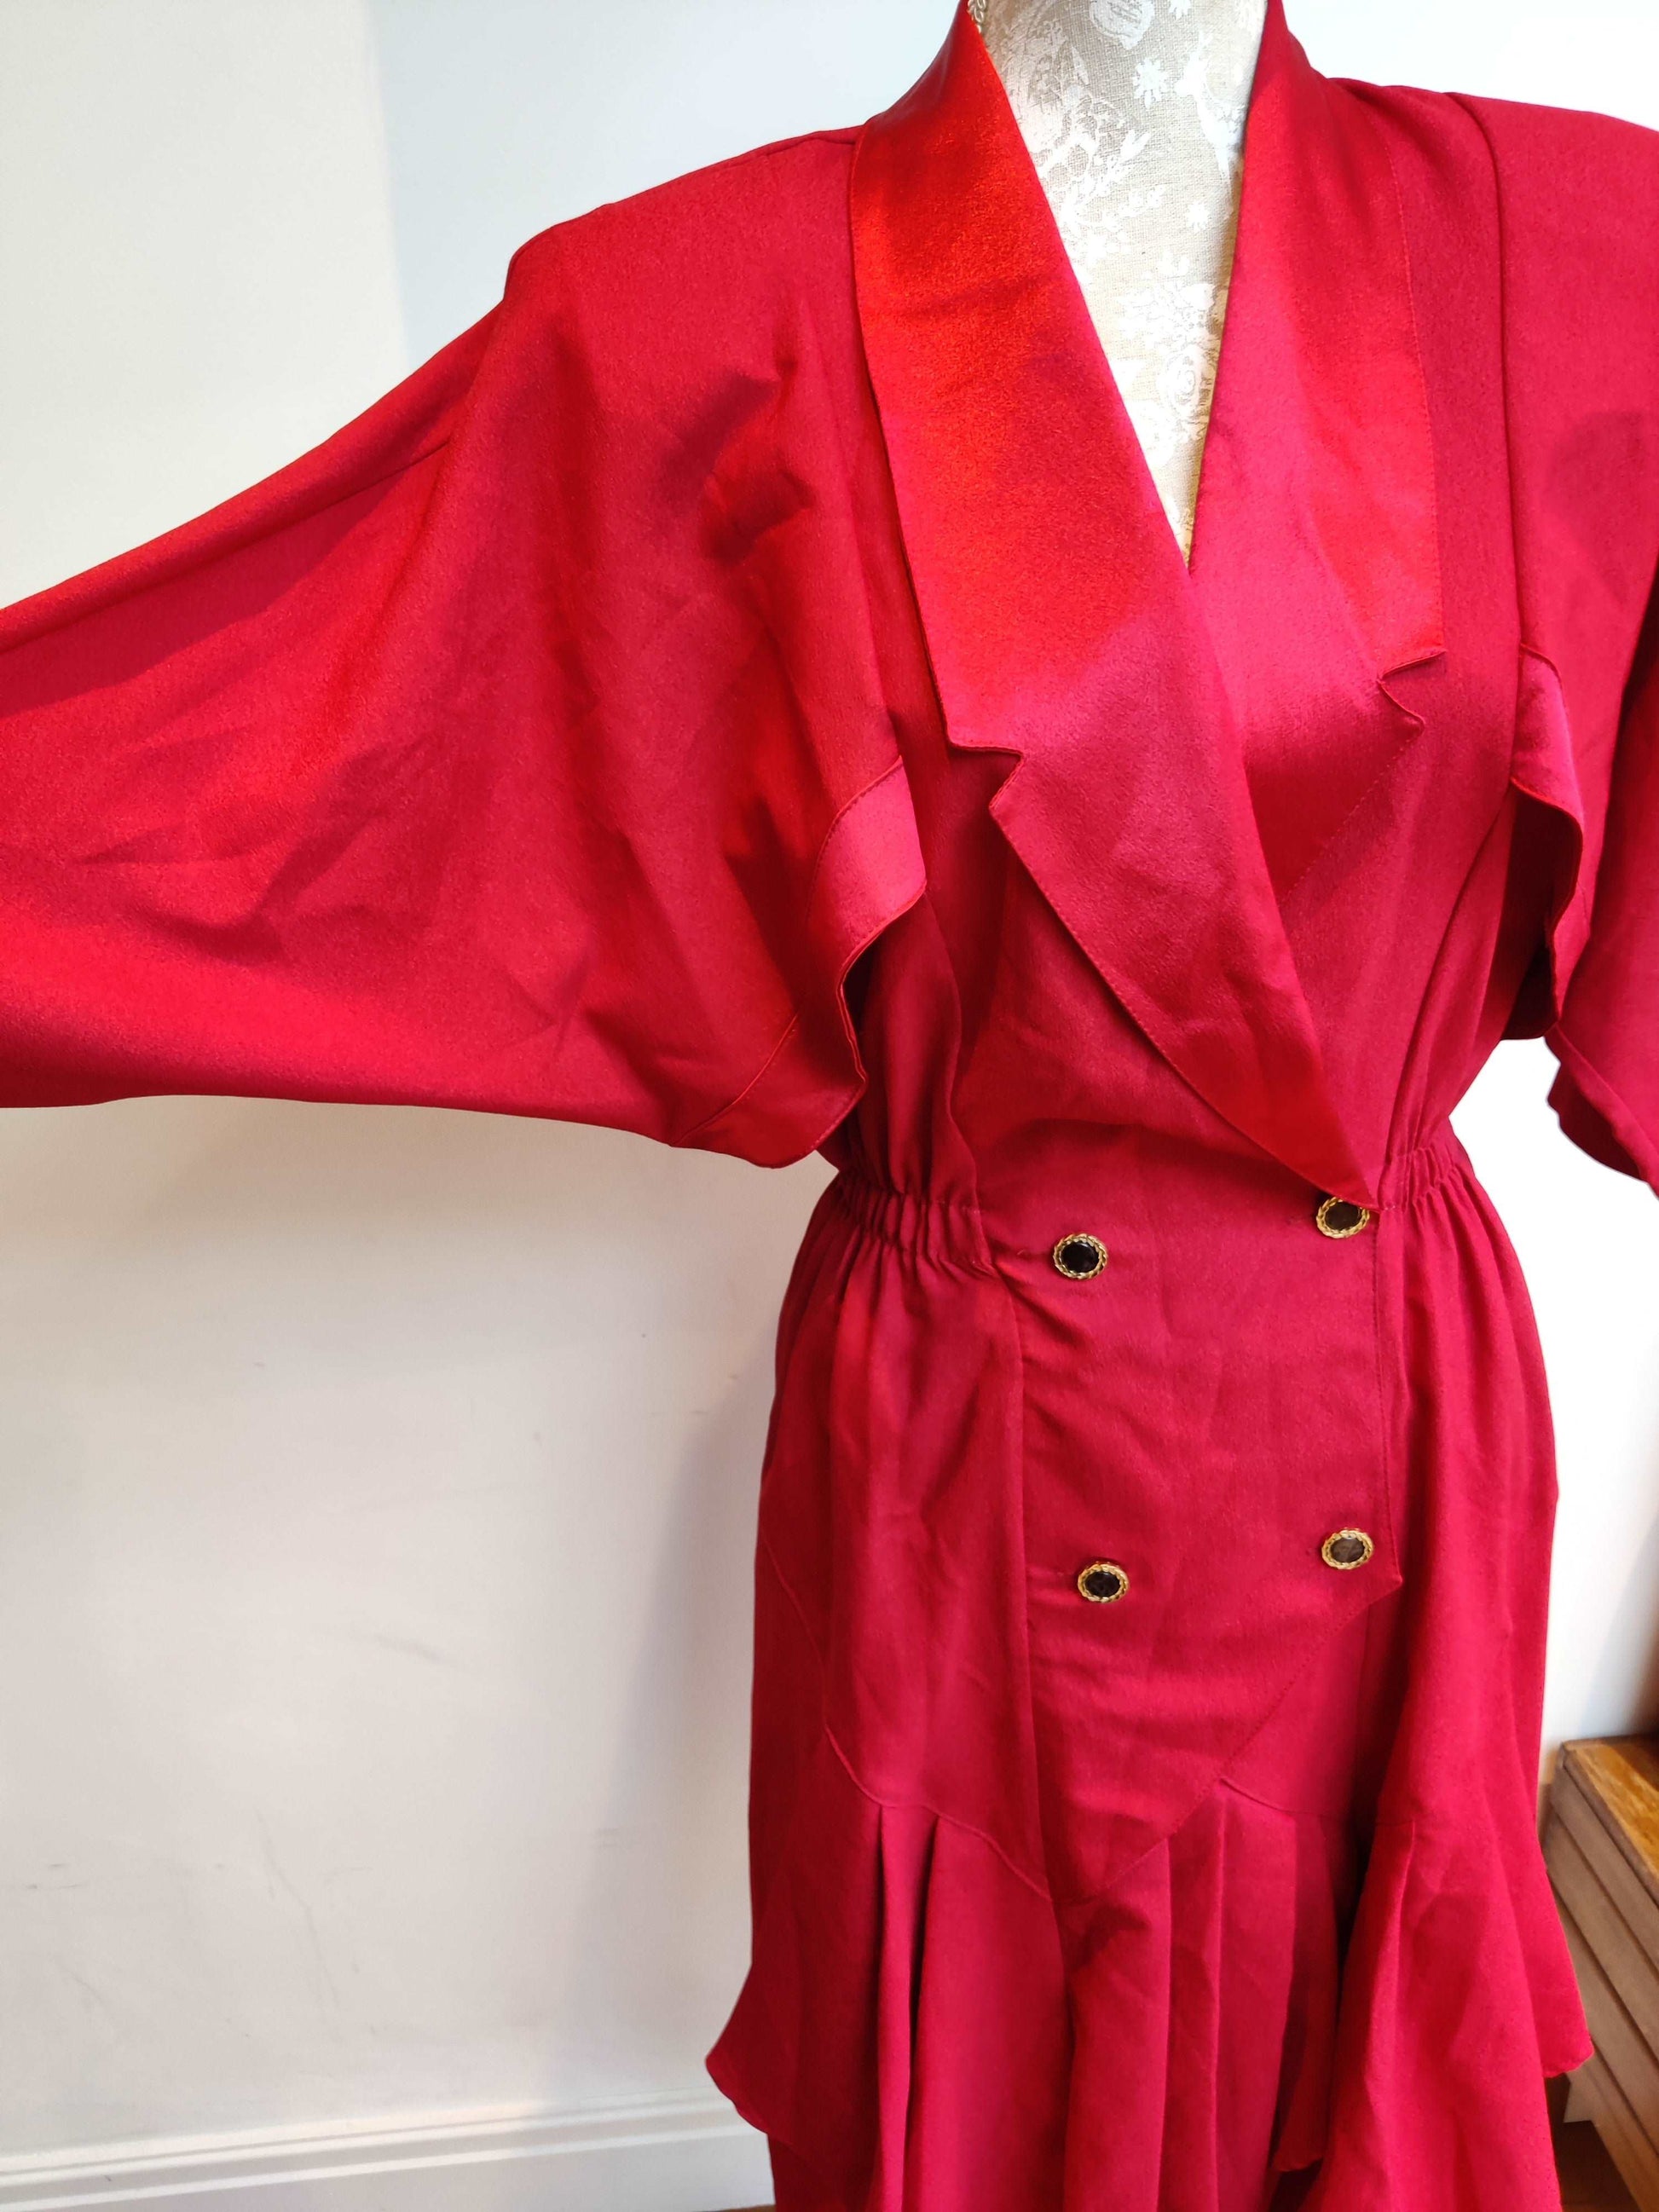 Batwing style sleeves on 80s red dress